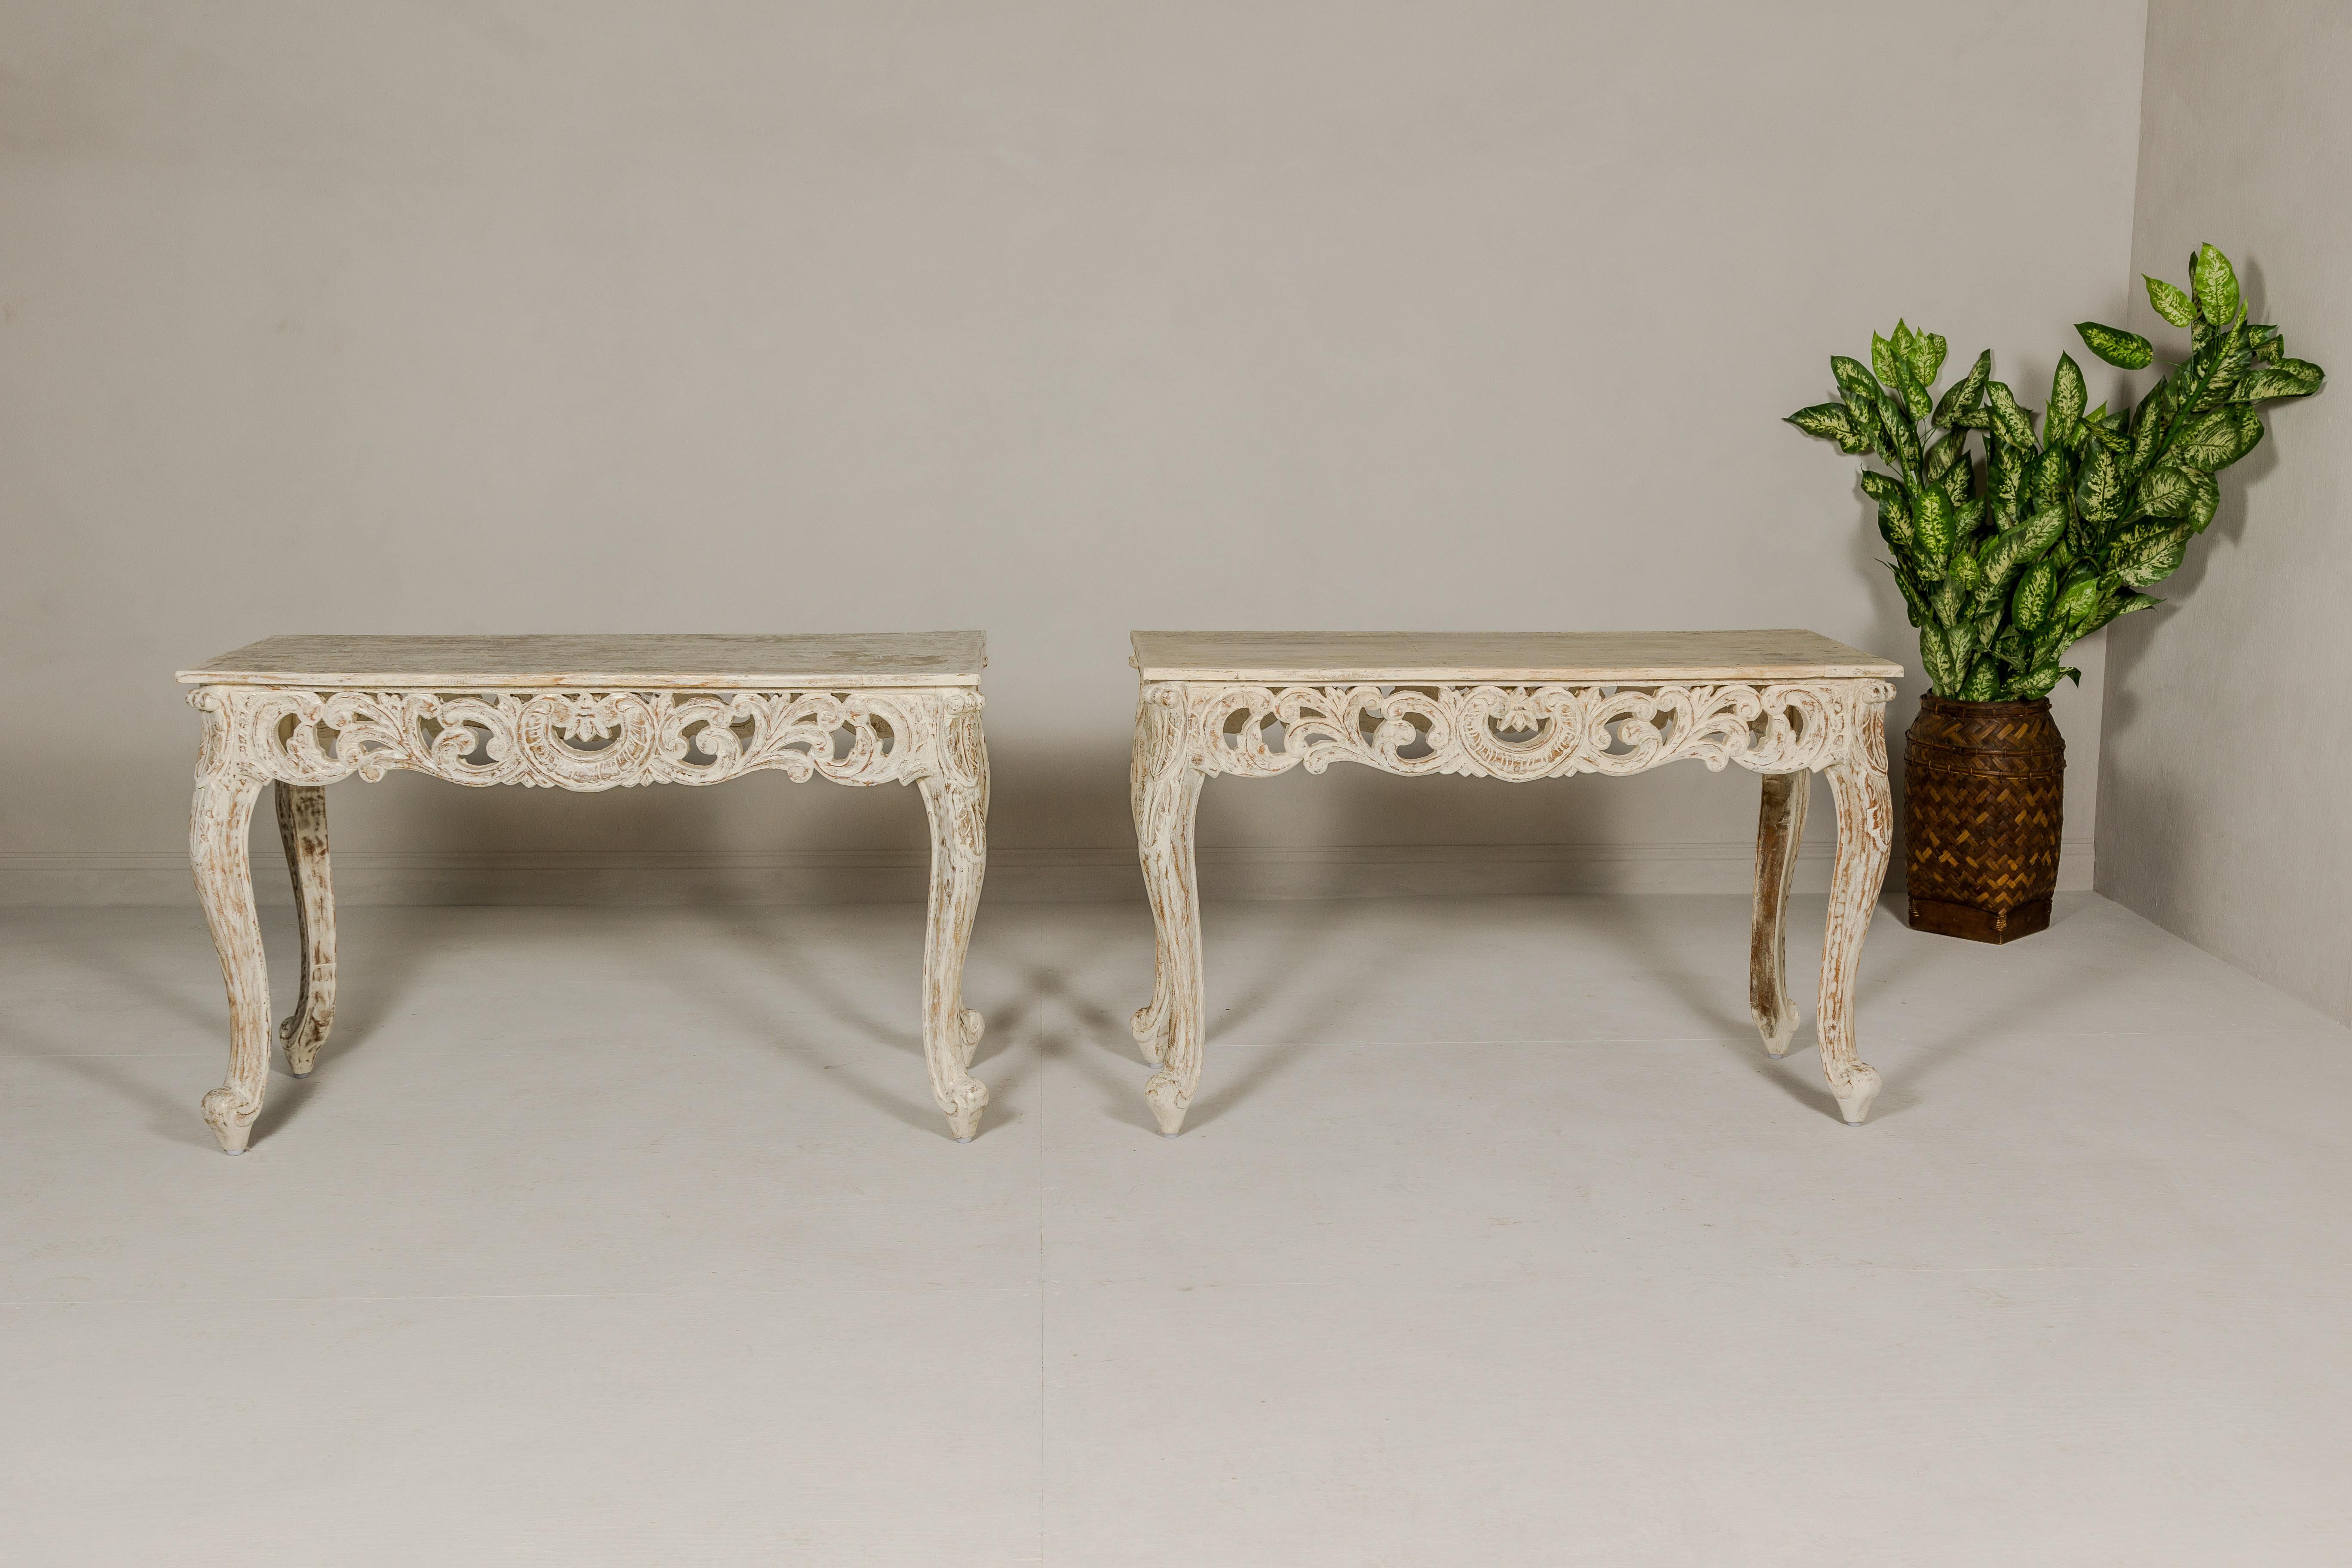 Rococo Style Painted Console Table with Carved Apron and Distressed Finish In Good Condition For Sale In Yonkers, NY